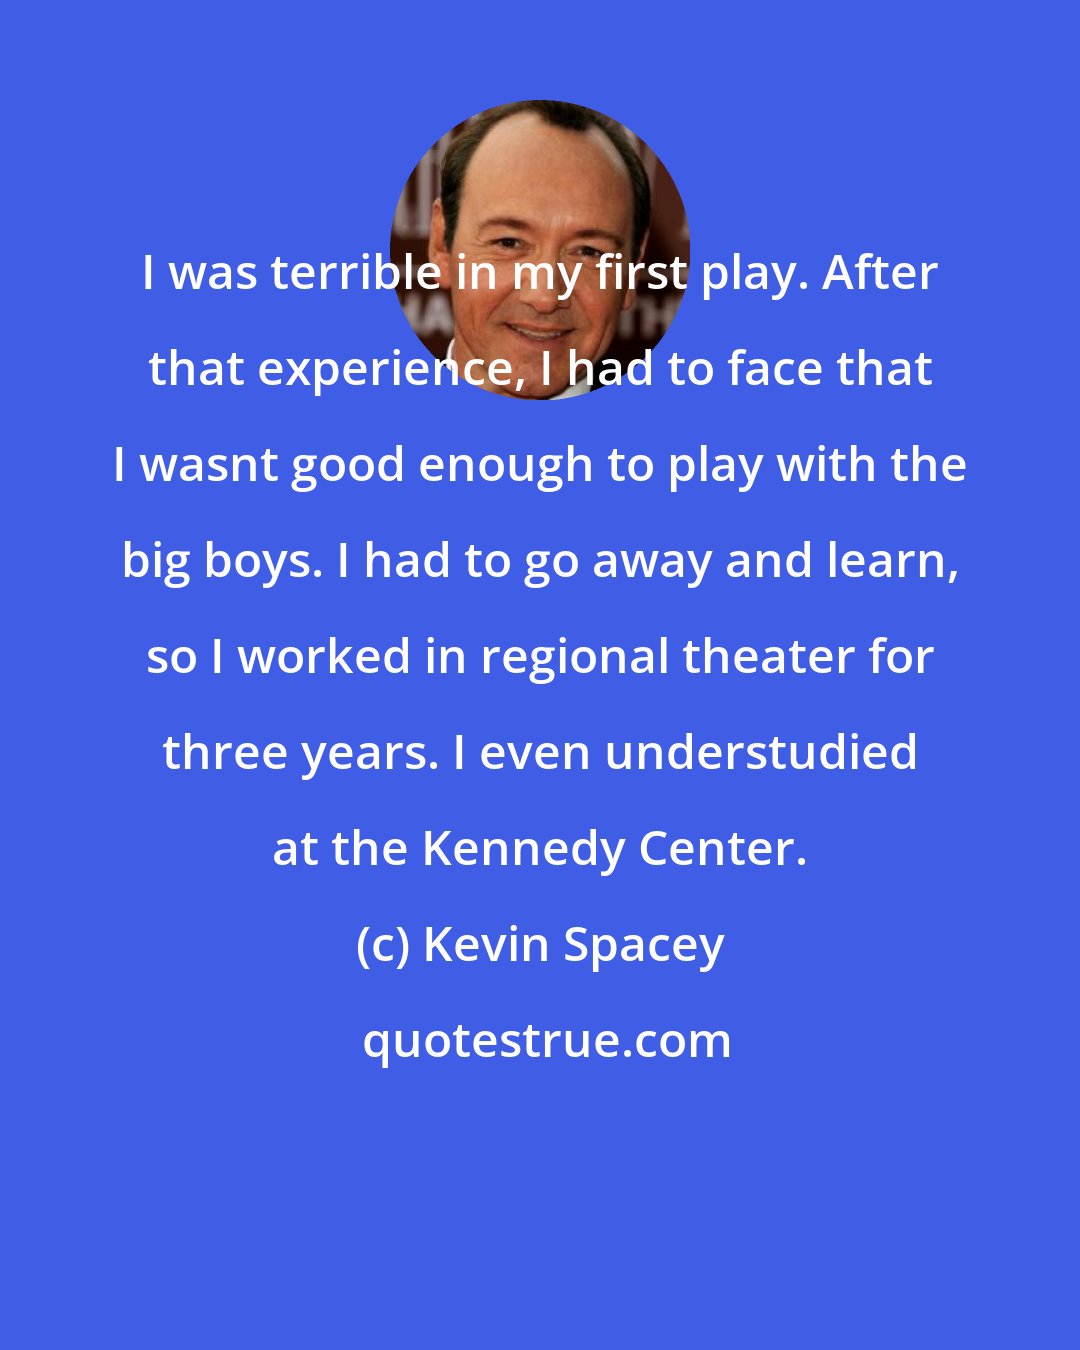 Kevin Spacey: I was terrible in my first play. After that experience, I had to face that I wasnt good enough to play with the big boys. I had to go away and learn, so I worked in regional theater for three years. I even understudied at the Kennedy Center.